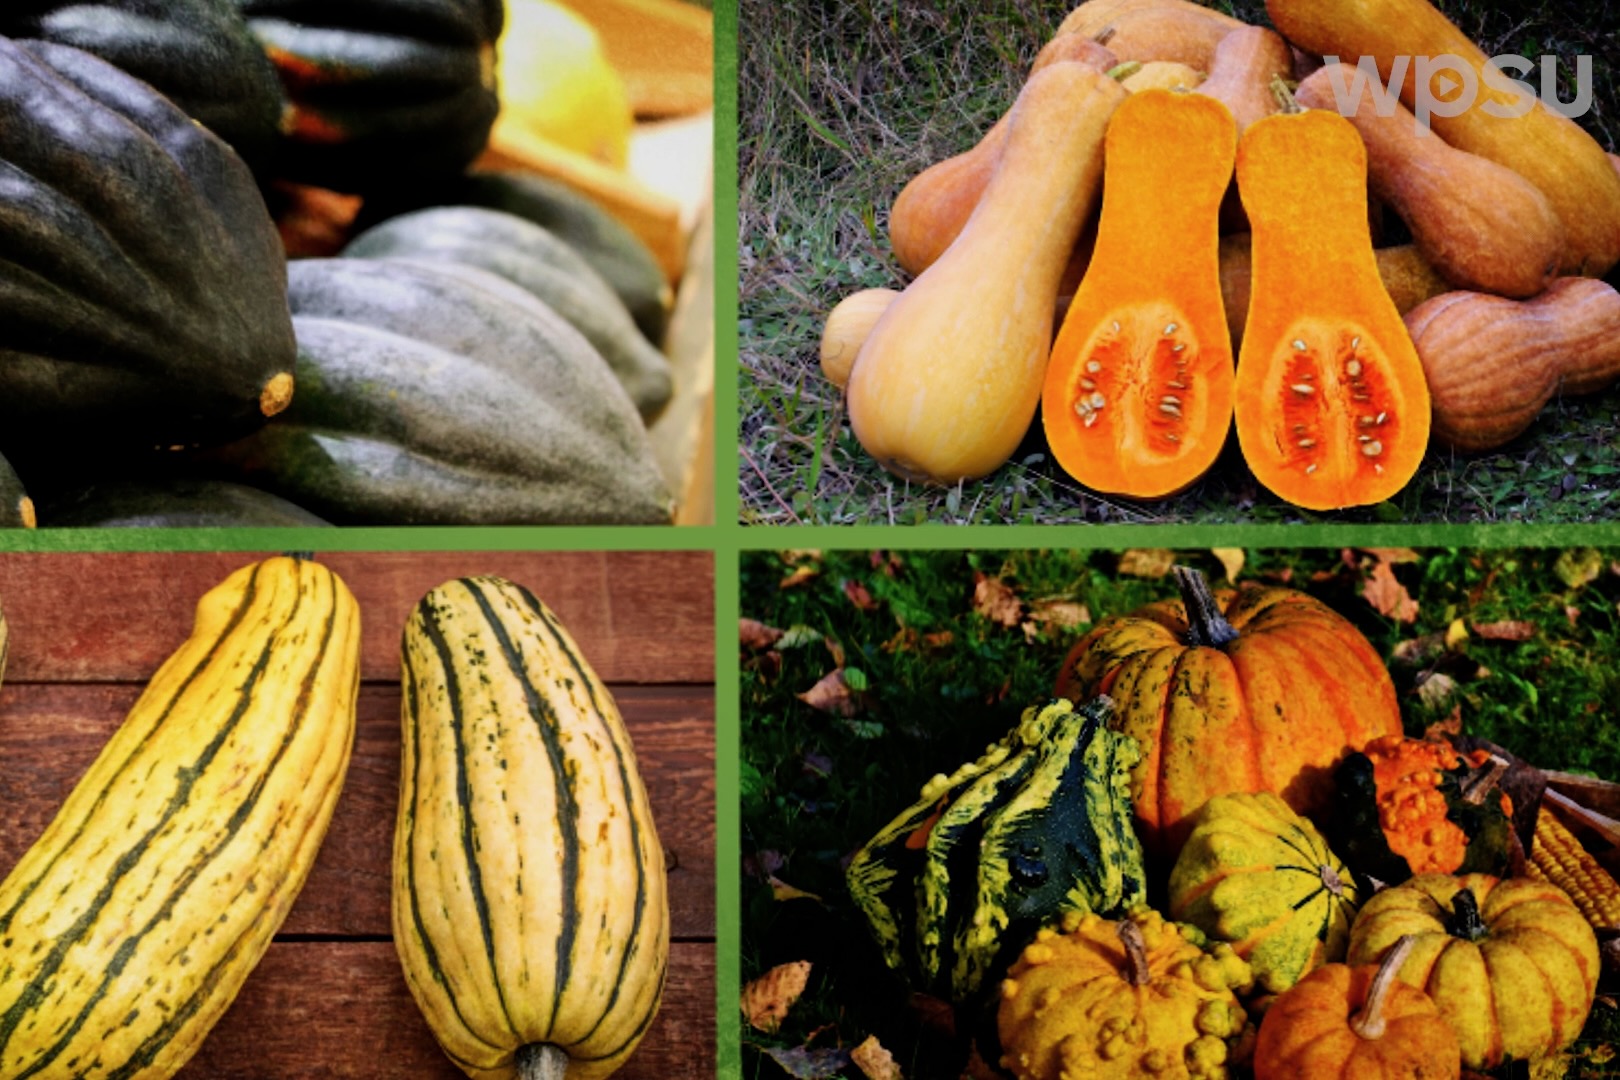 Several types of winter squash pictured in a square.